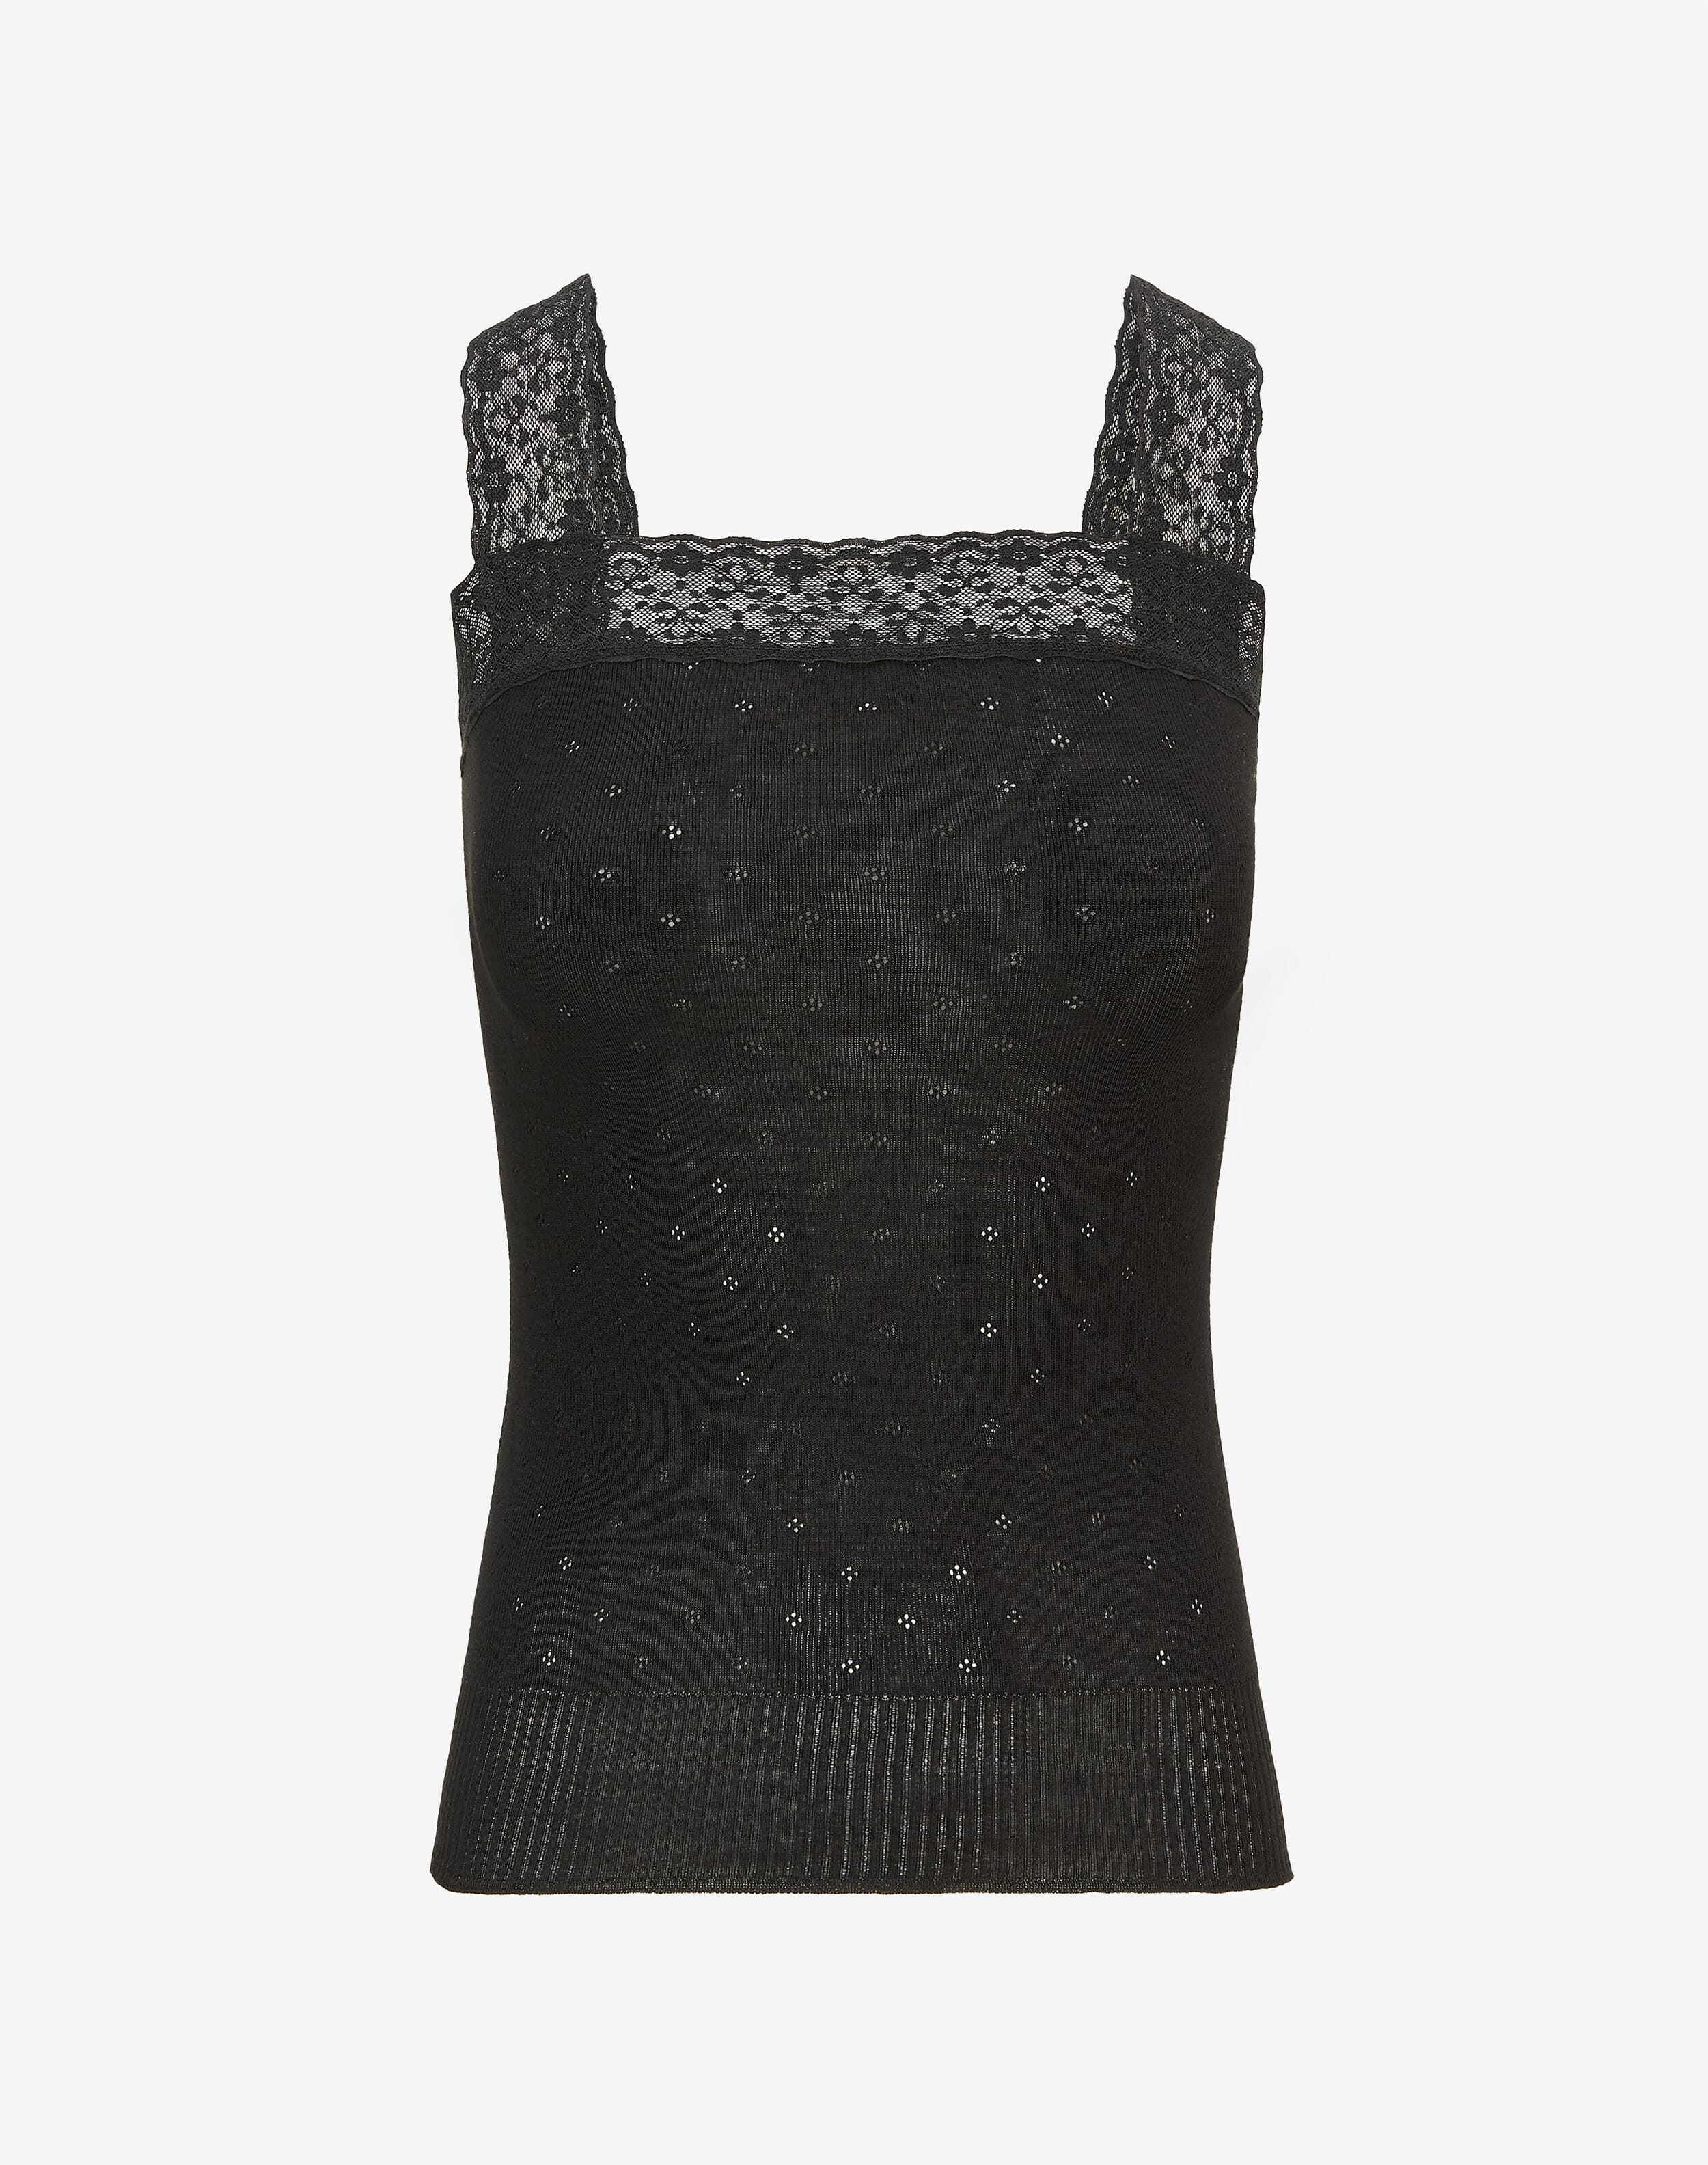 Lace Trim Camisole in Black, Women's Tops & T-Shirts